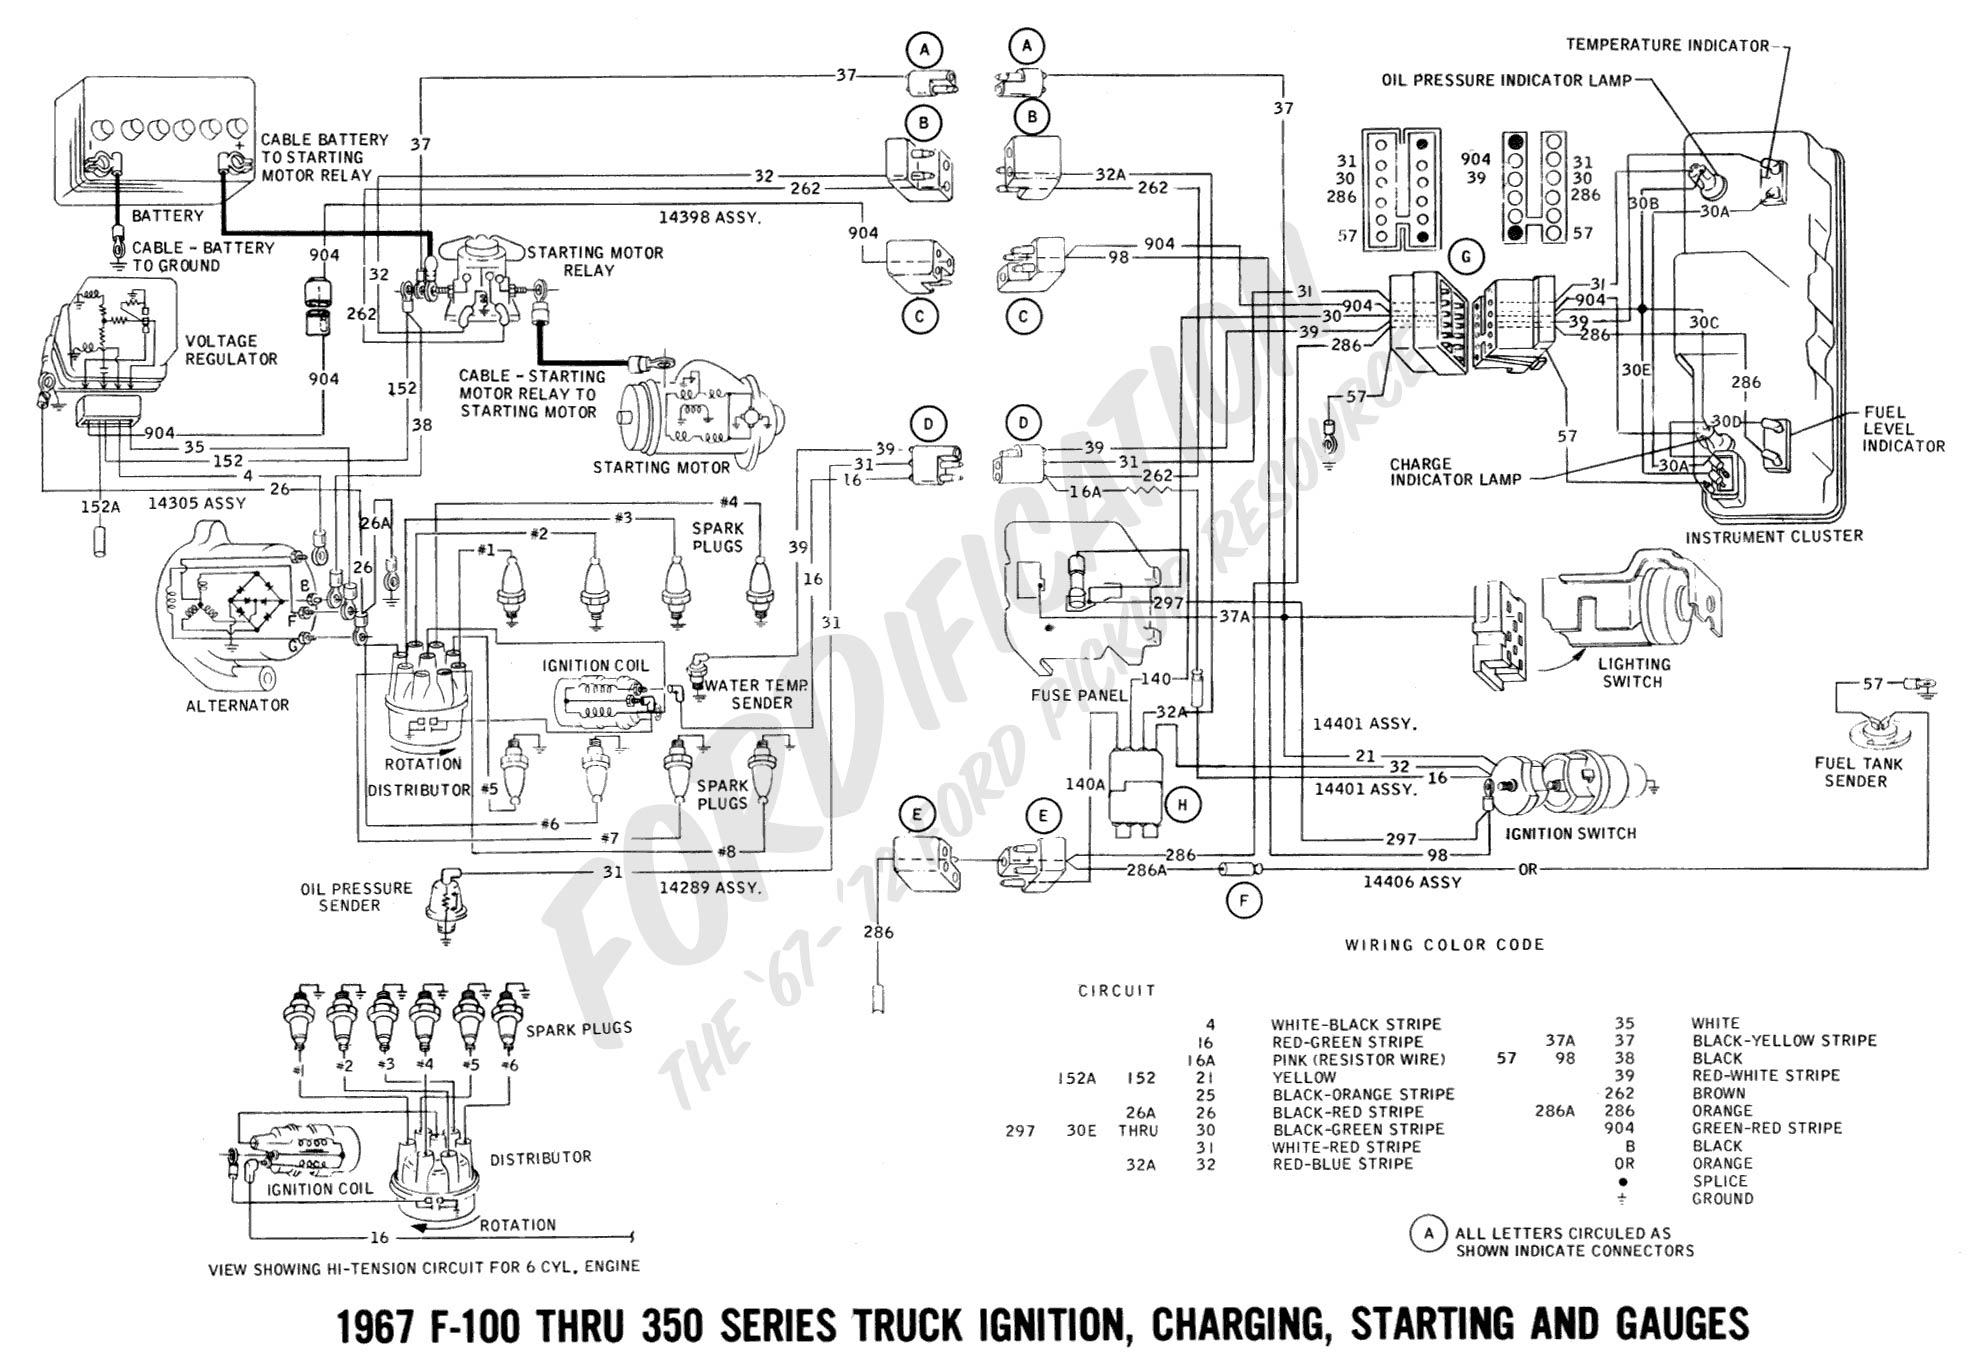 Ford Truck Technical Drawings and Schematics - Section H - Wiring Diagrams  2013 Ford F350 Ignition Switch Wiring Diagram    FORDification.com